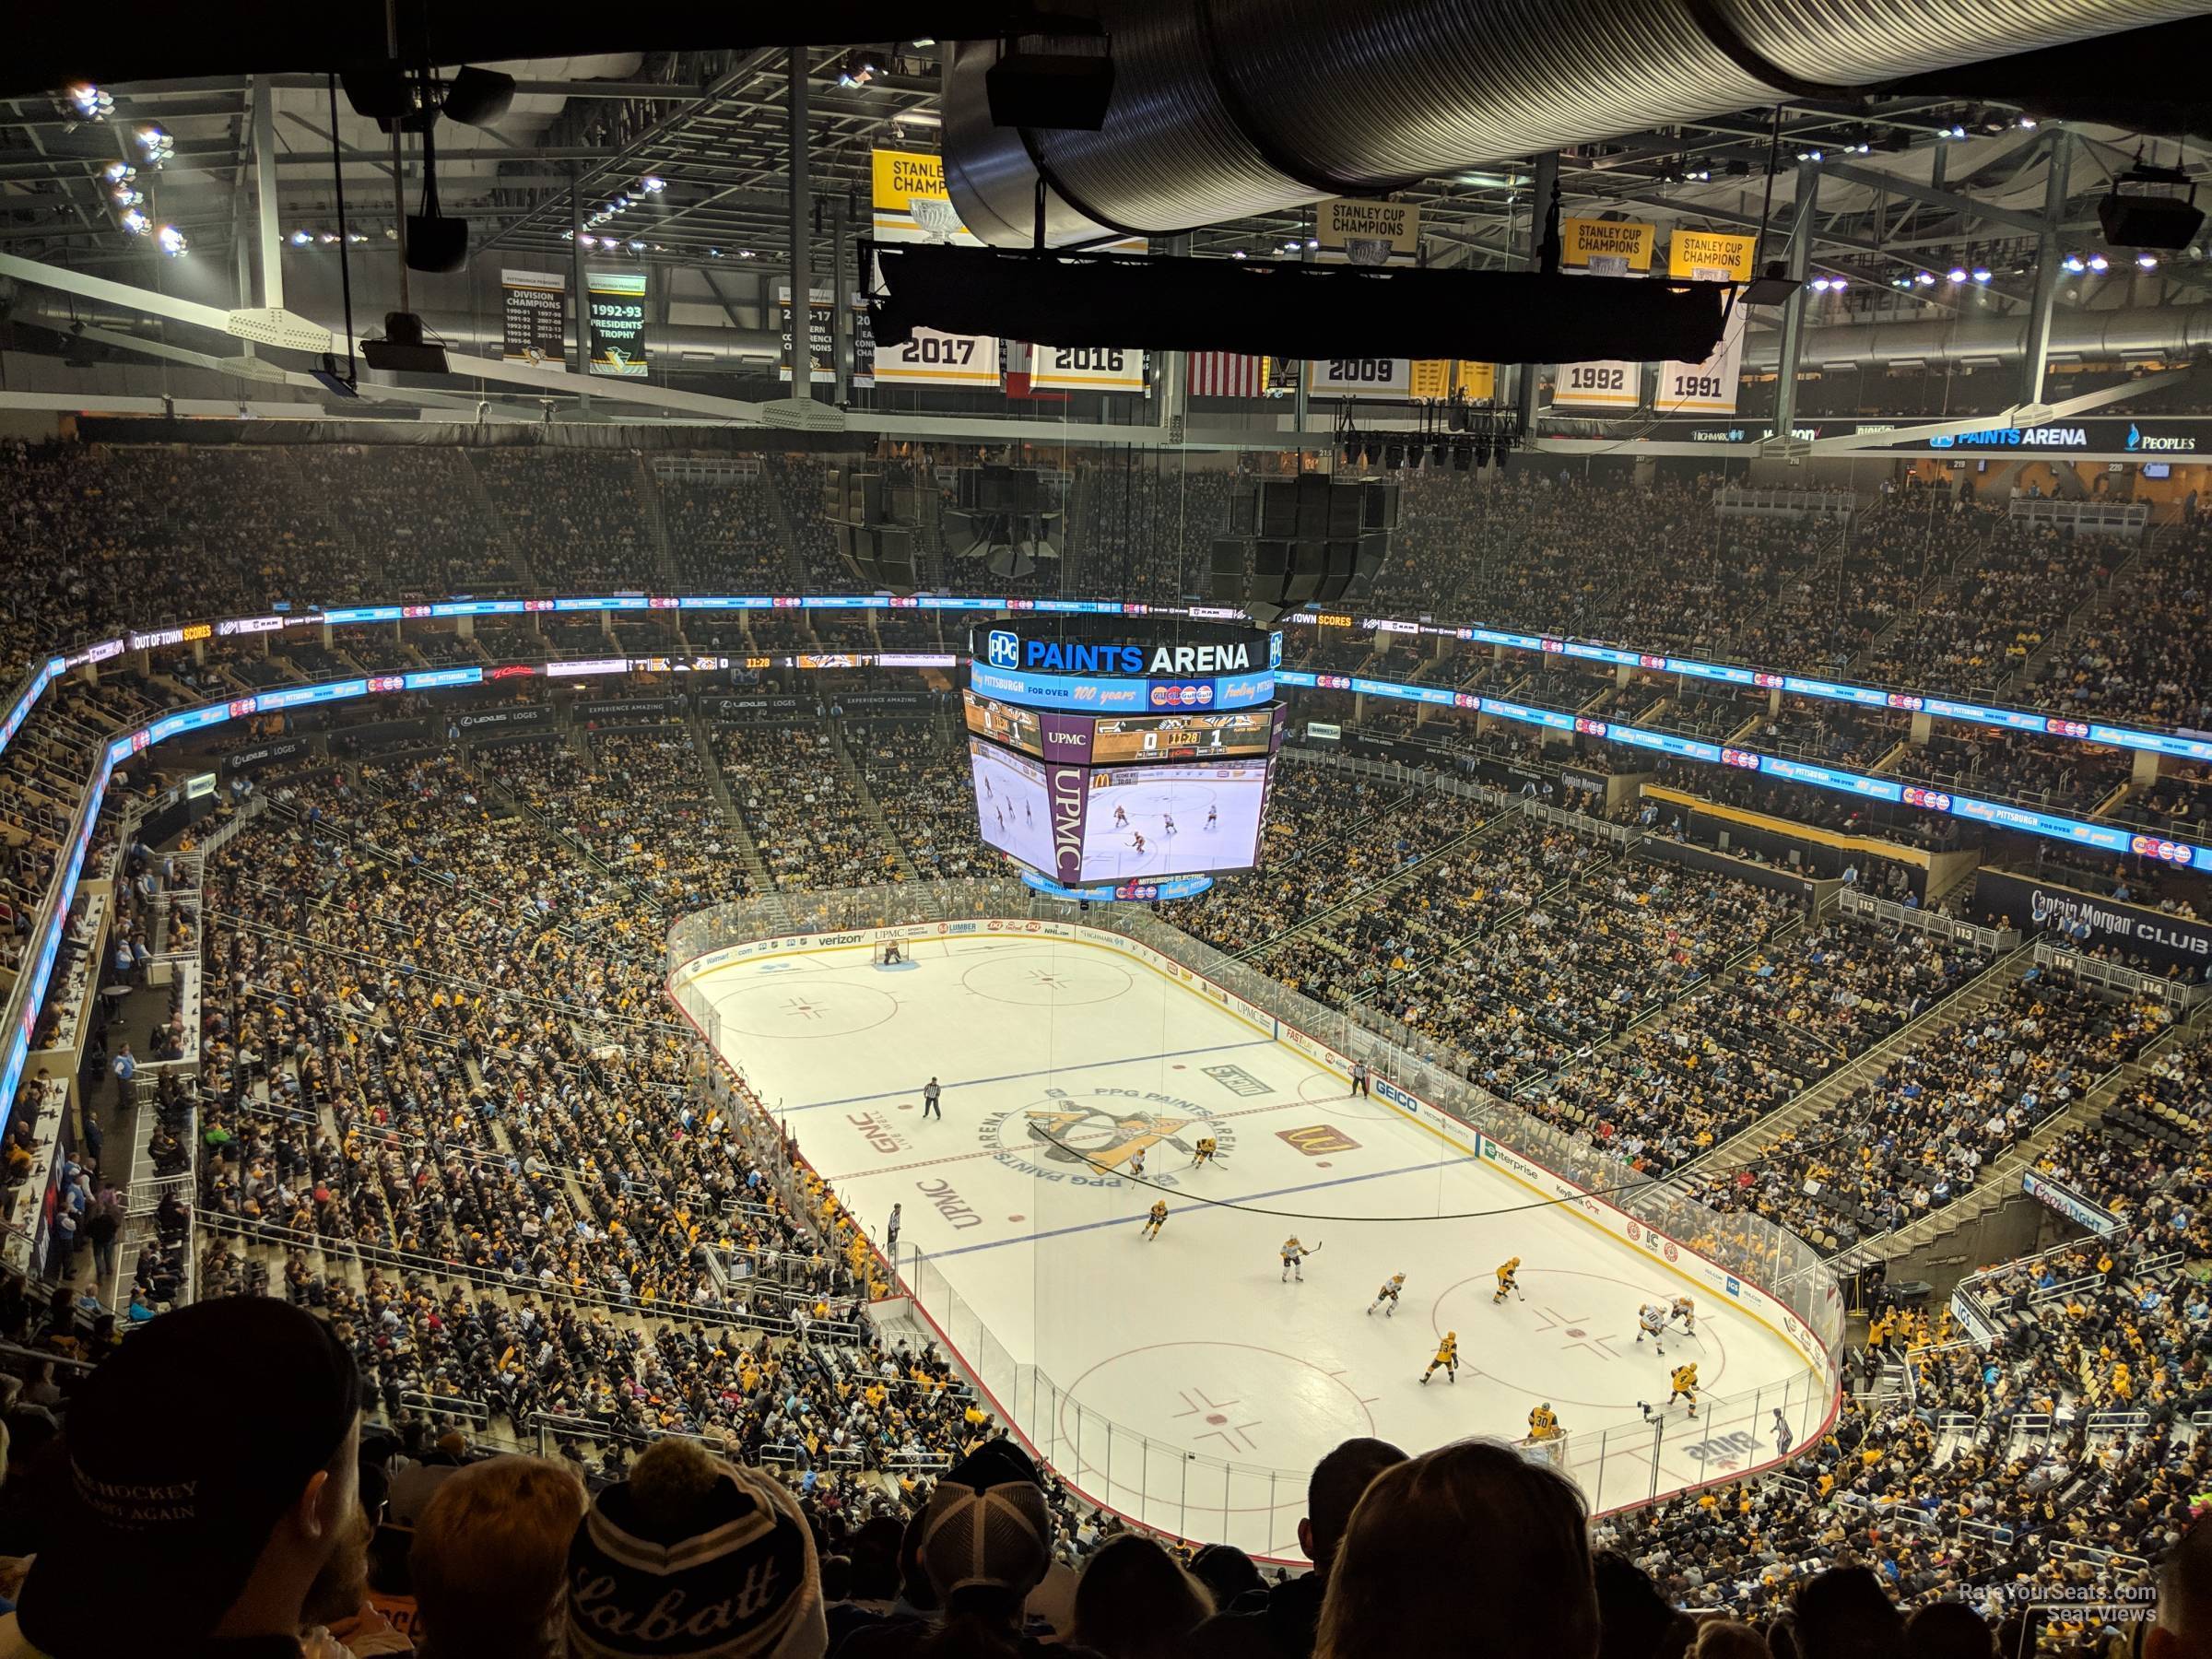 section 231, row sro seat view  for hockey - ppg paints arena